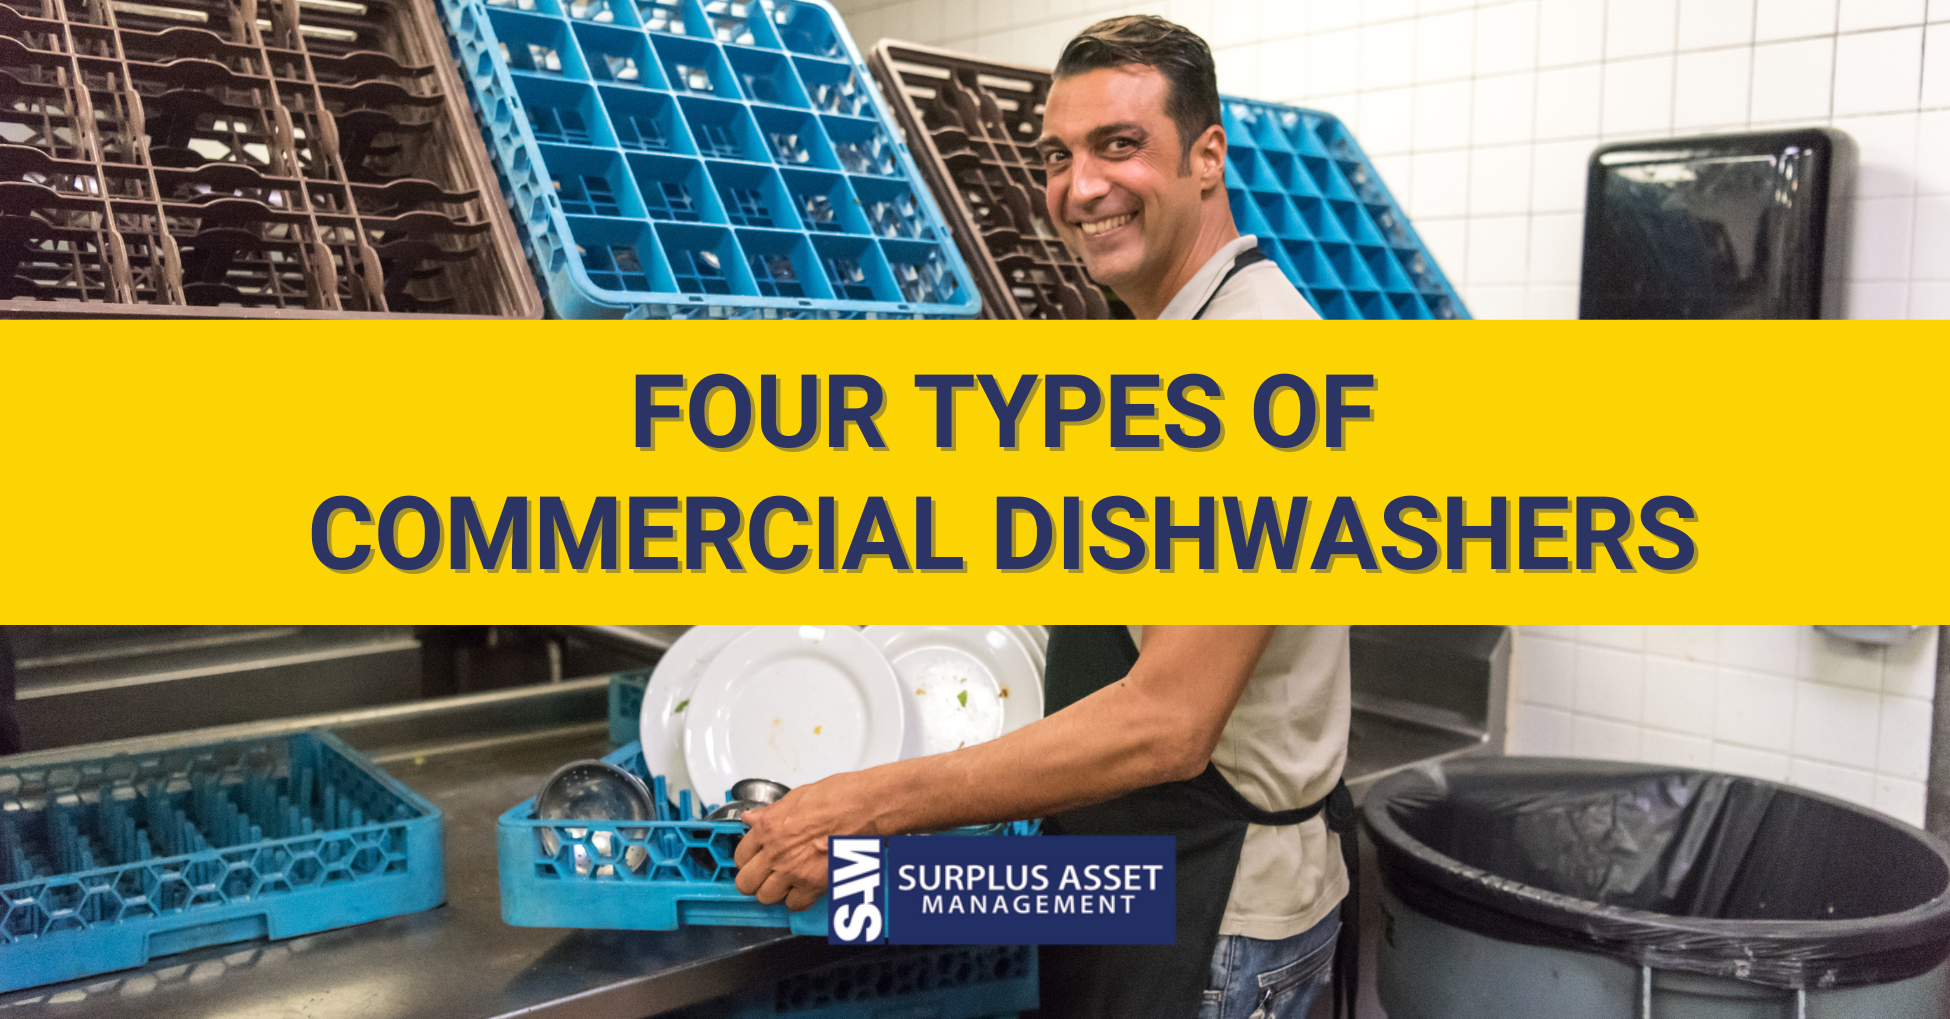 4 Types of Commercial Dishwashers